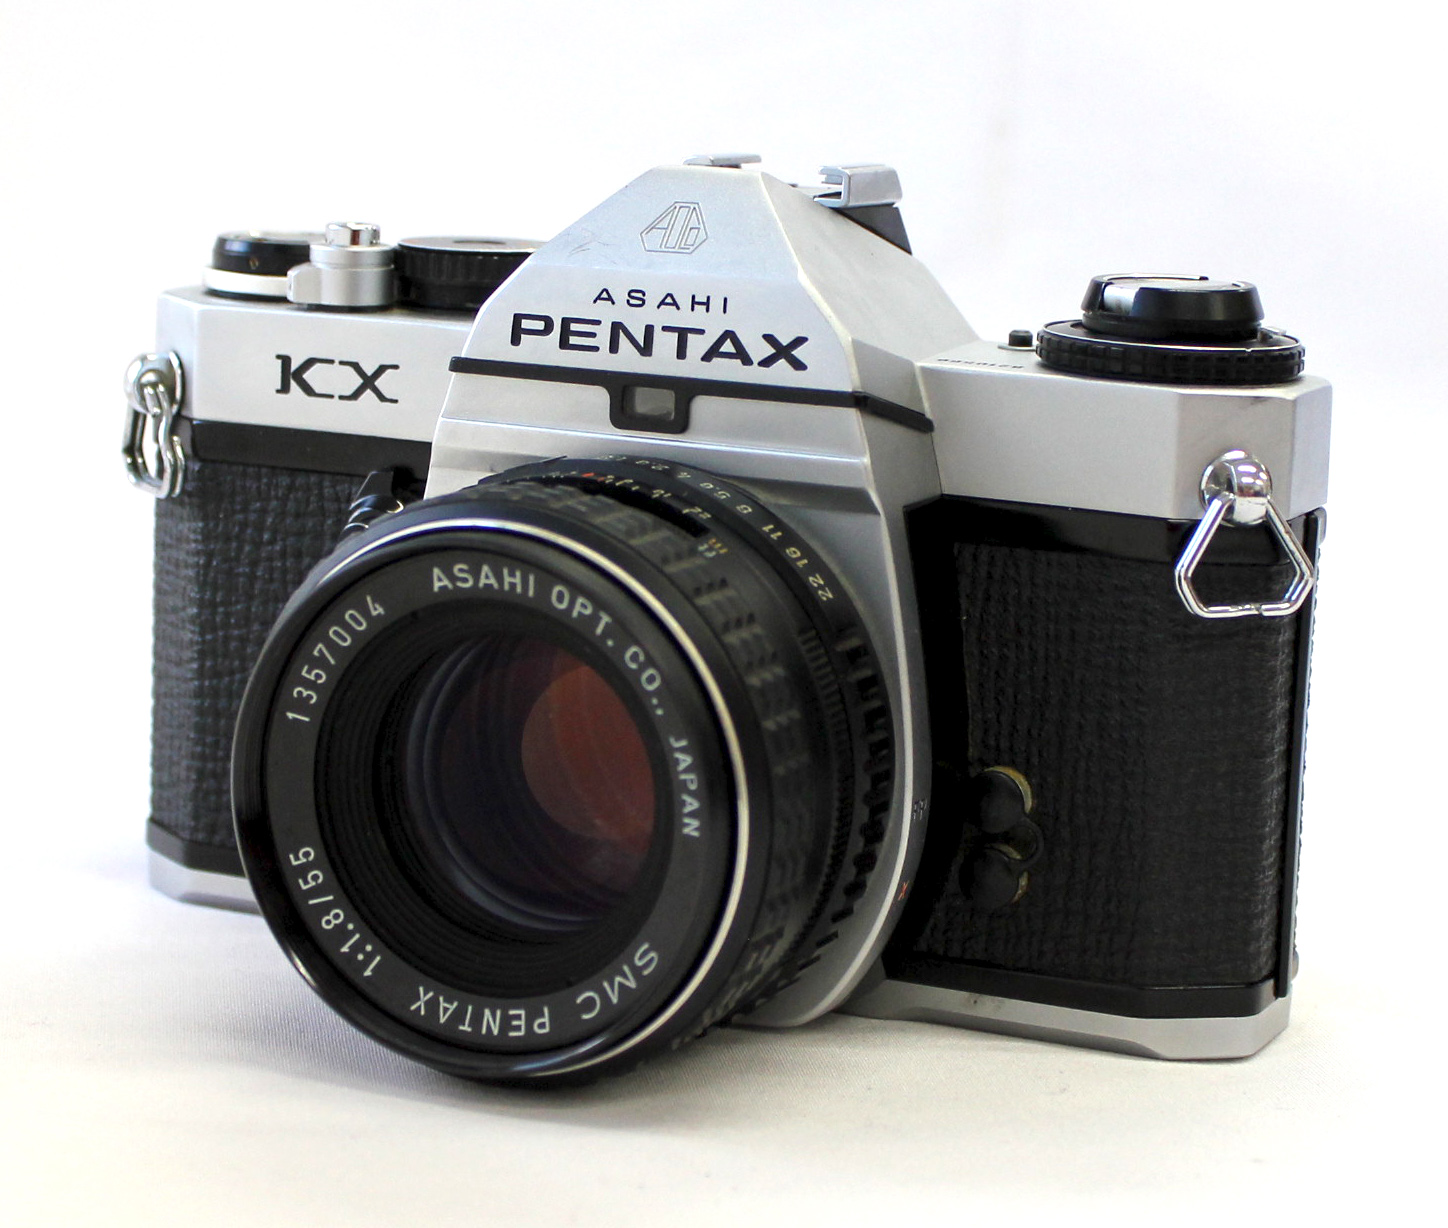 Japan Used Camera Shop | [Excellent] Pentax KX with Bonus Lens SMC Pentax 55mm F/1.8 from Japan